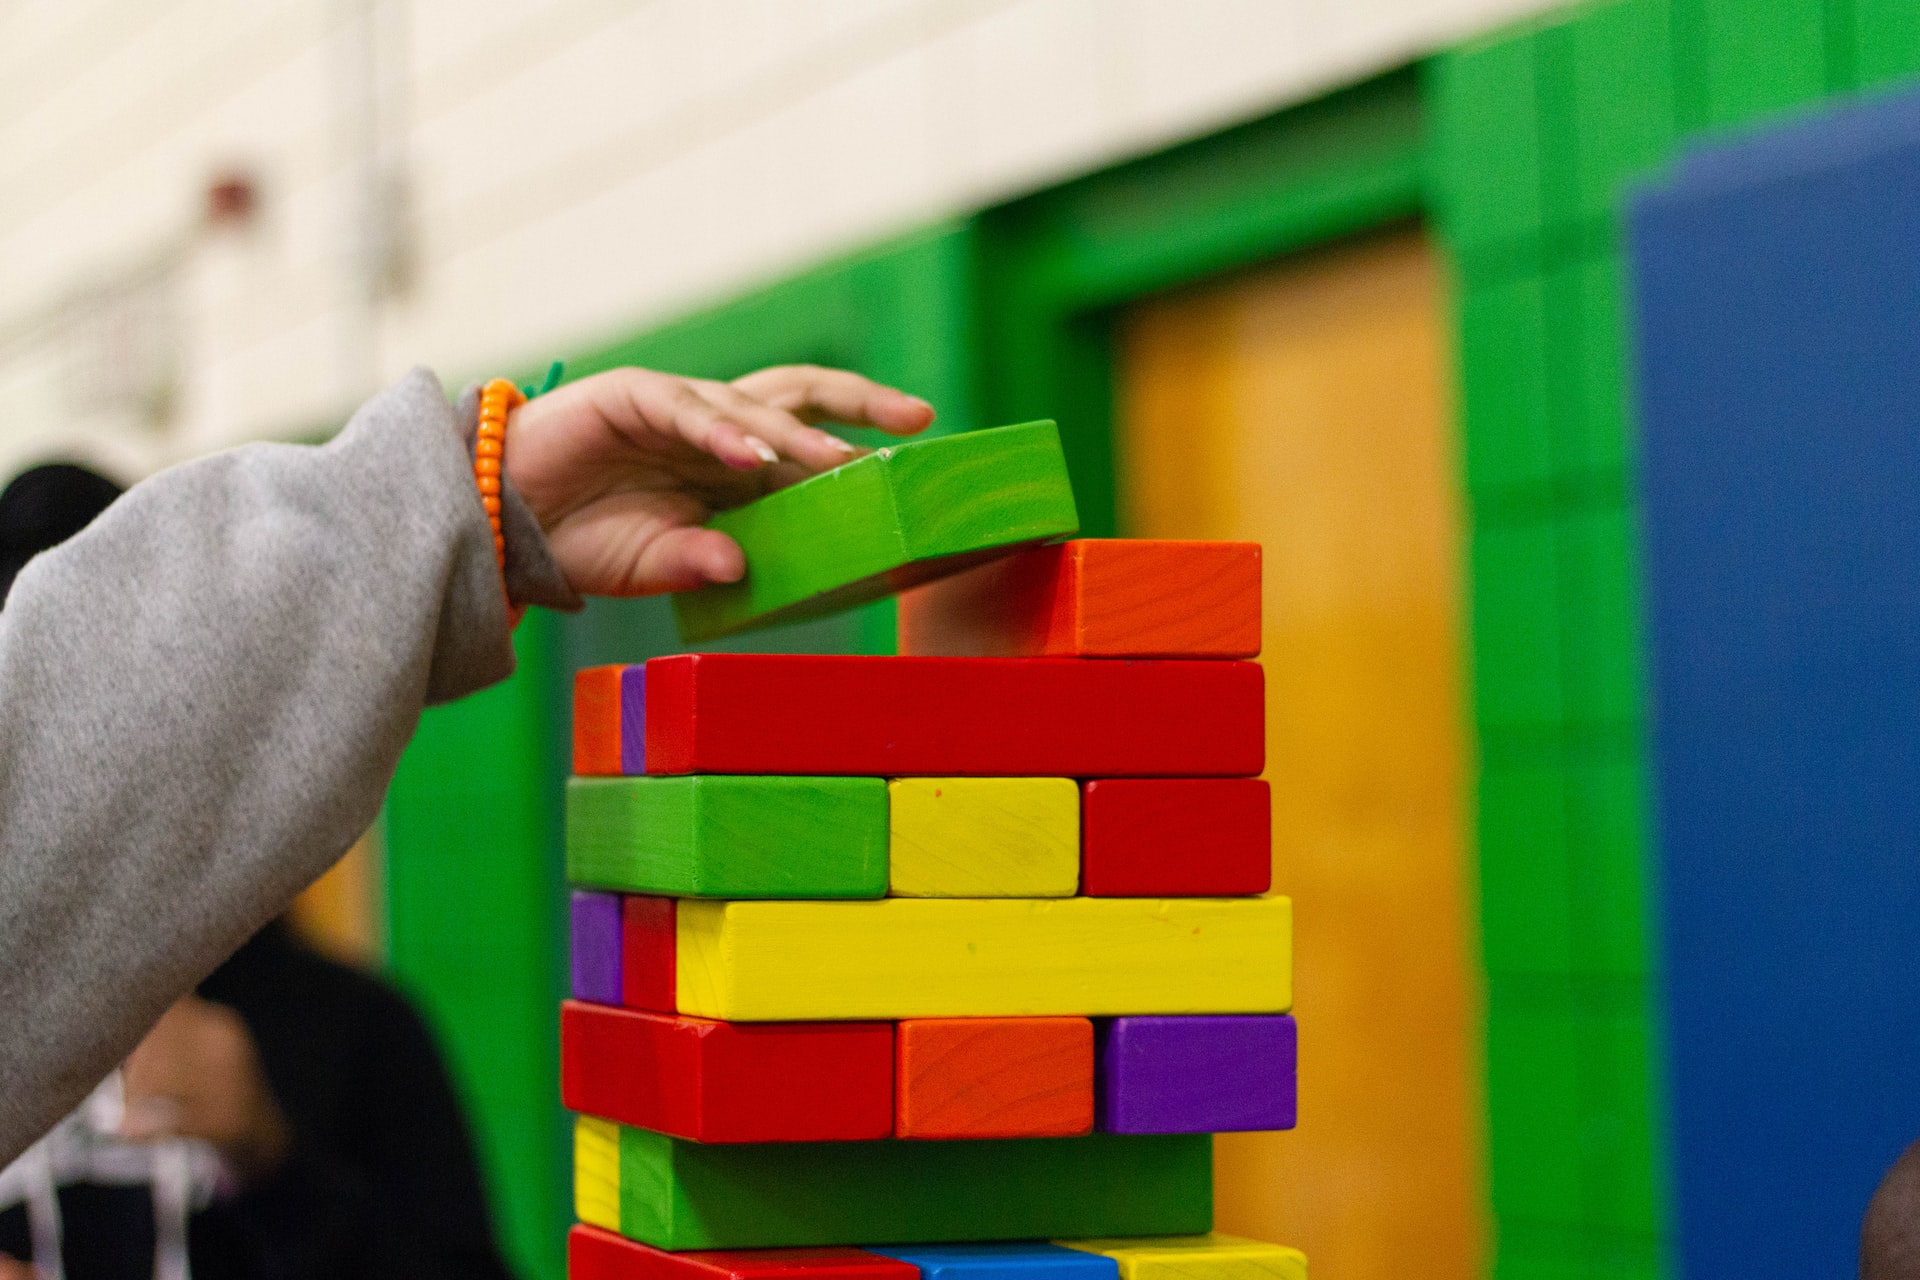 Incremental Delivery showing a child's hand stacking colorful blocks